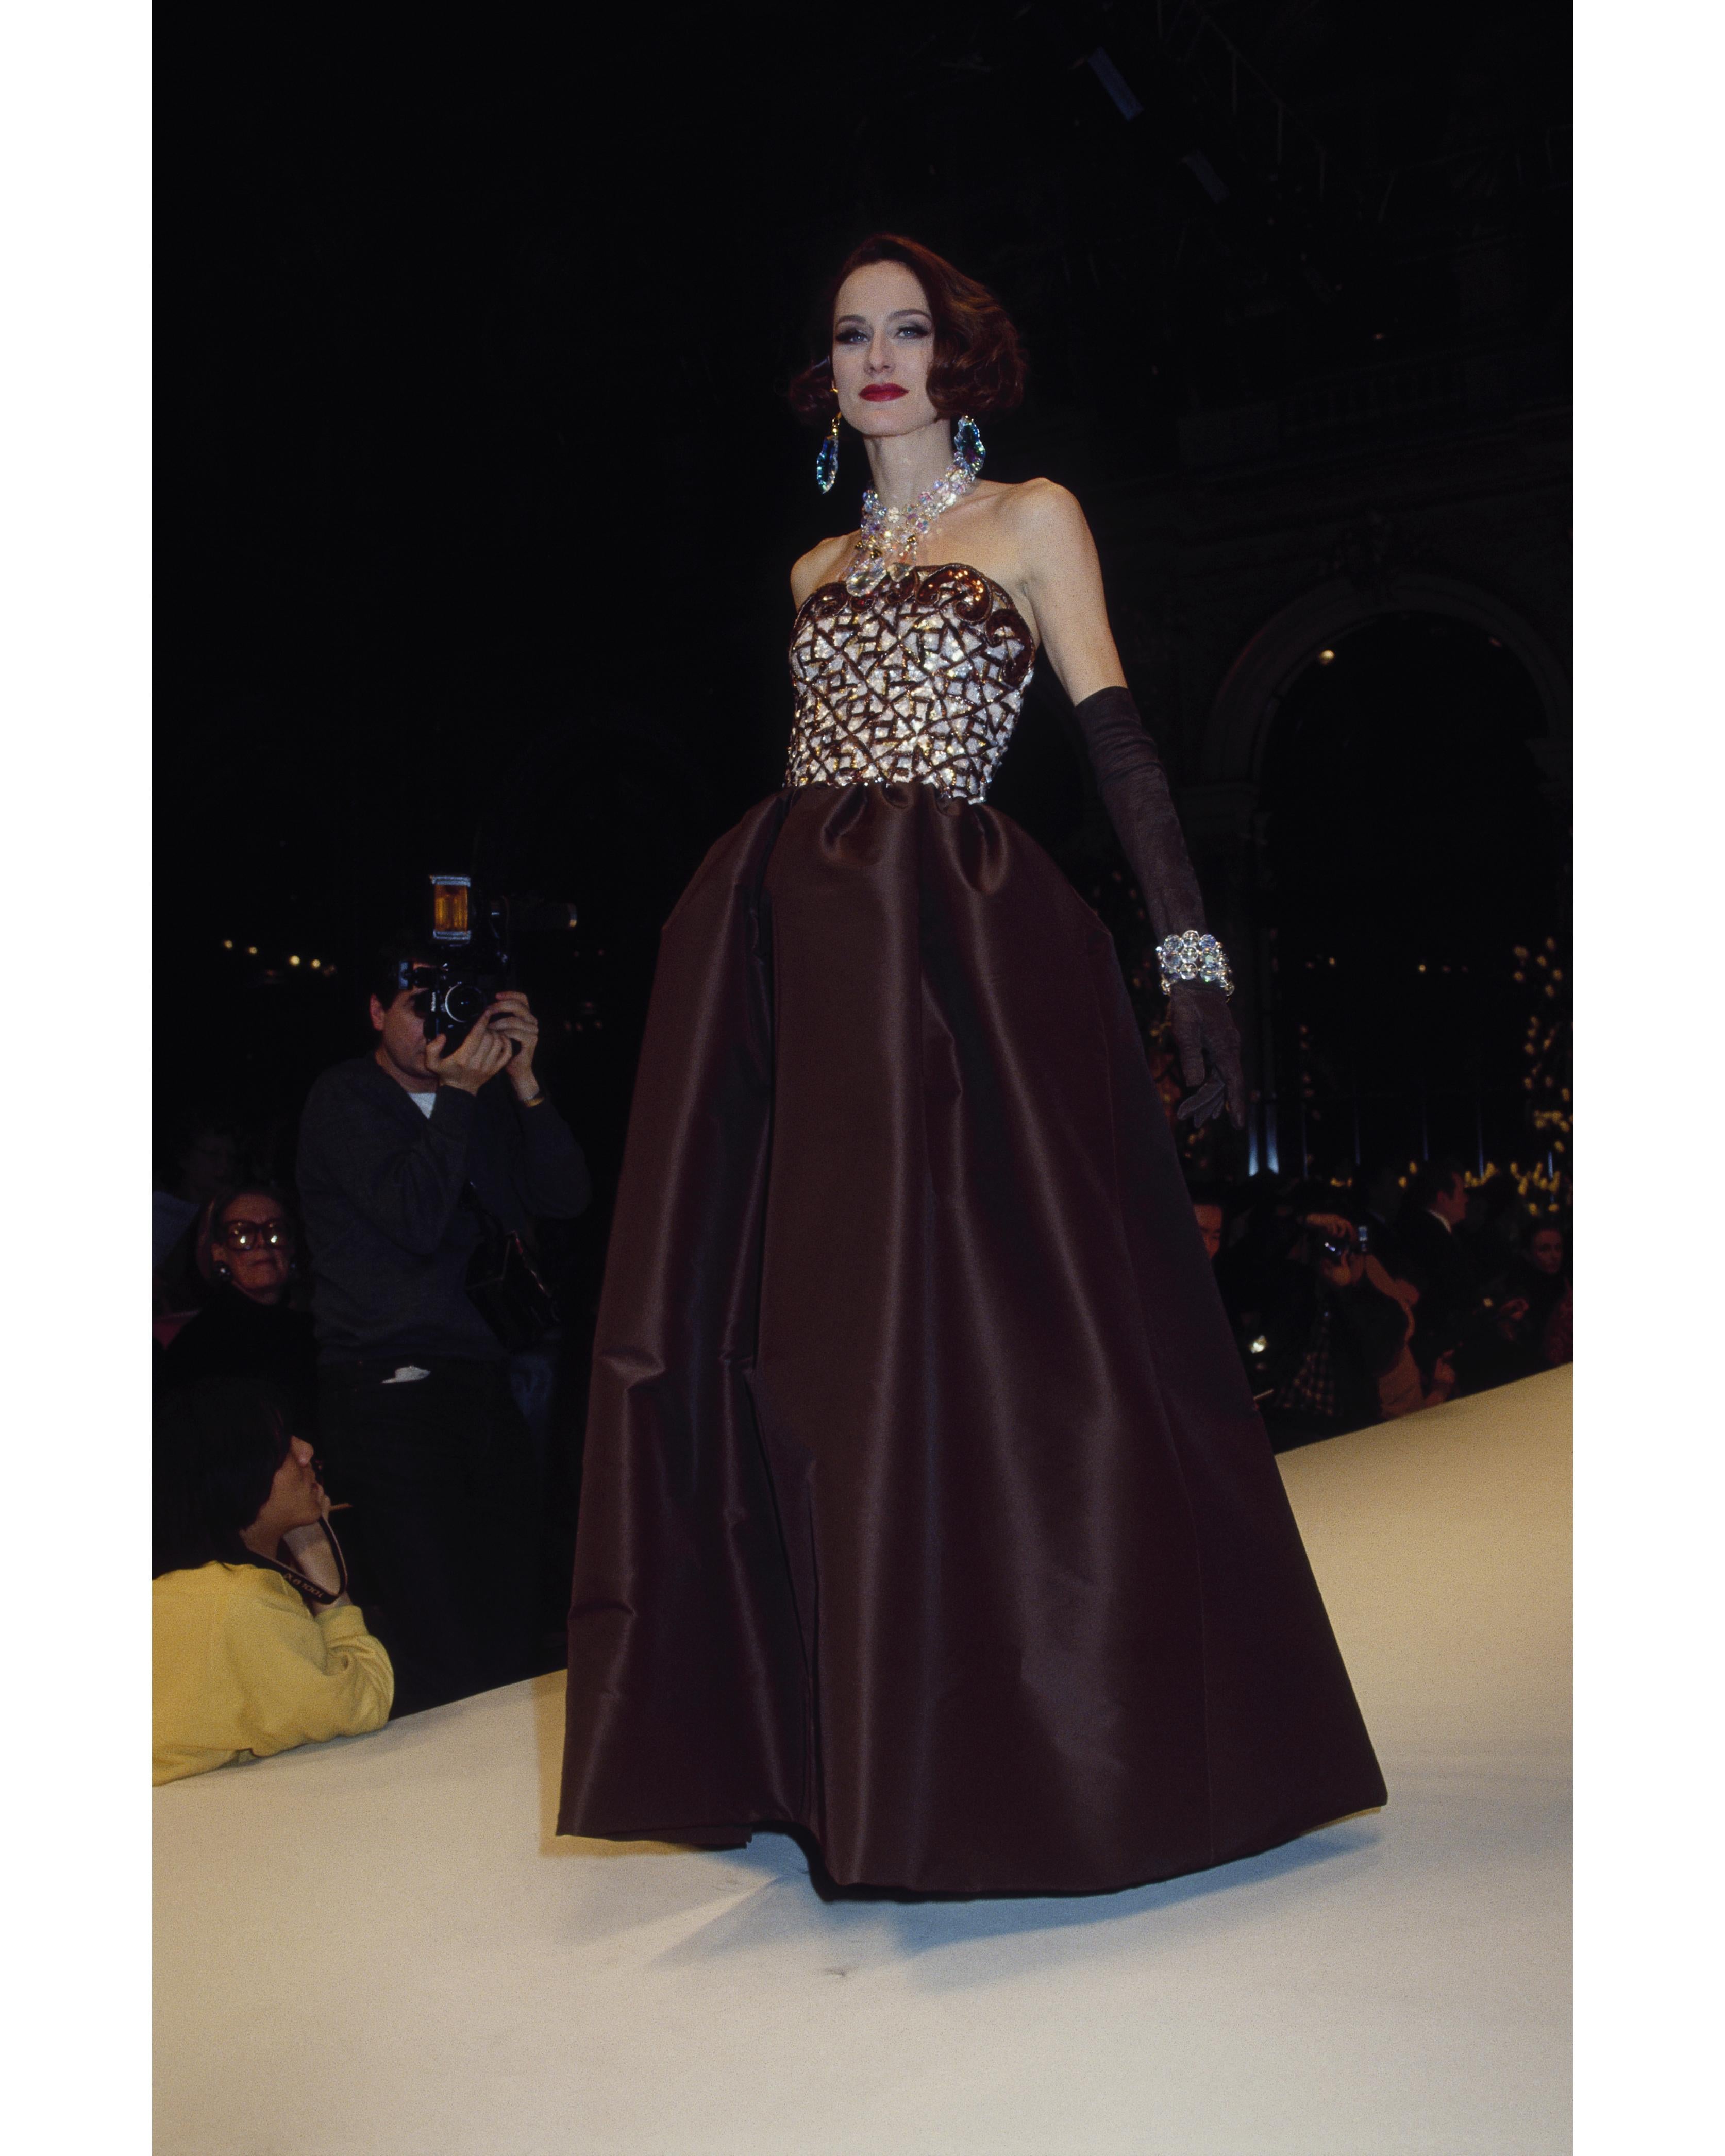 S/S 1992 Givenchy Haute Couture deep brown strapless gown with embroidered sequin and raffia bustier by Maison Lesage. Bustier features brown geometric pattern throughout and 3D filigree curved loop details at top. Side zip closure and functional